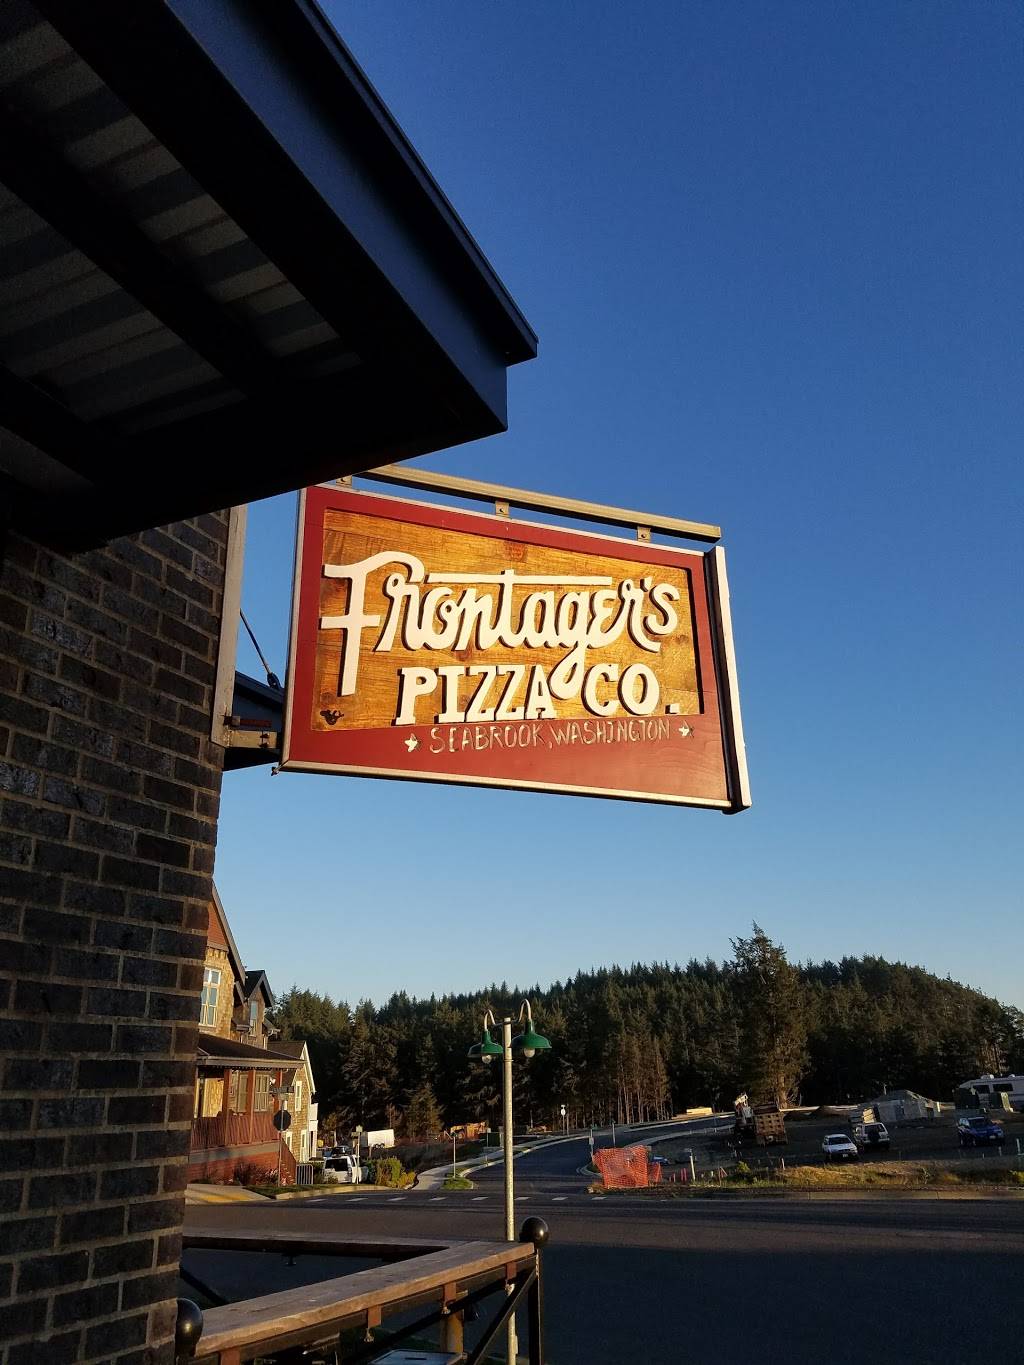 Frontagers Pizza Co. | restaurant | 21 Seabrook Ave, Pacific Beach, WA 98571, USA | 3602760297 OR +1 360-276-0297